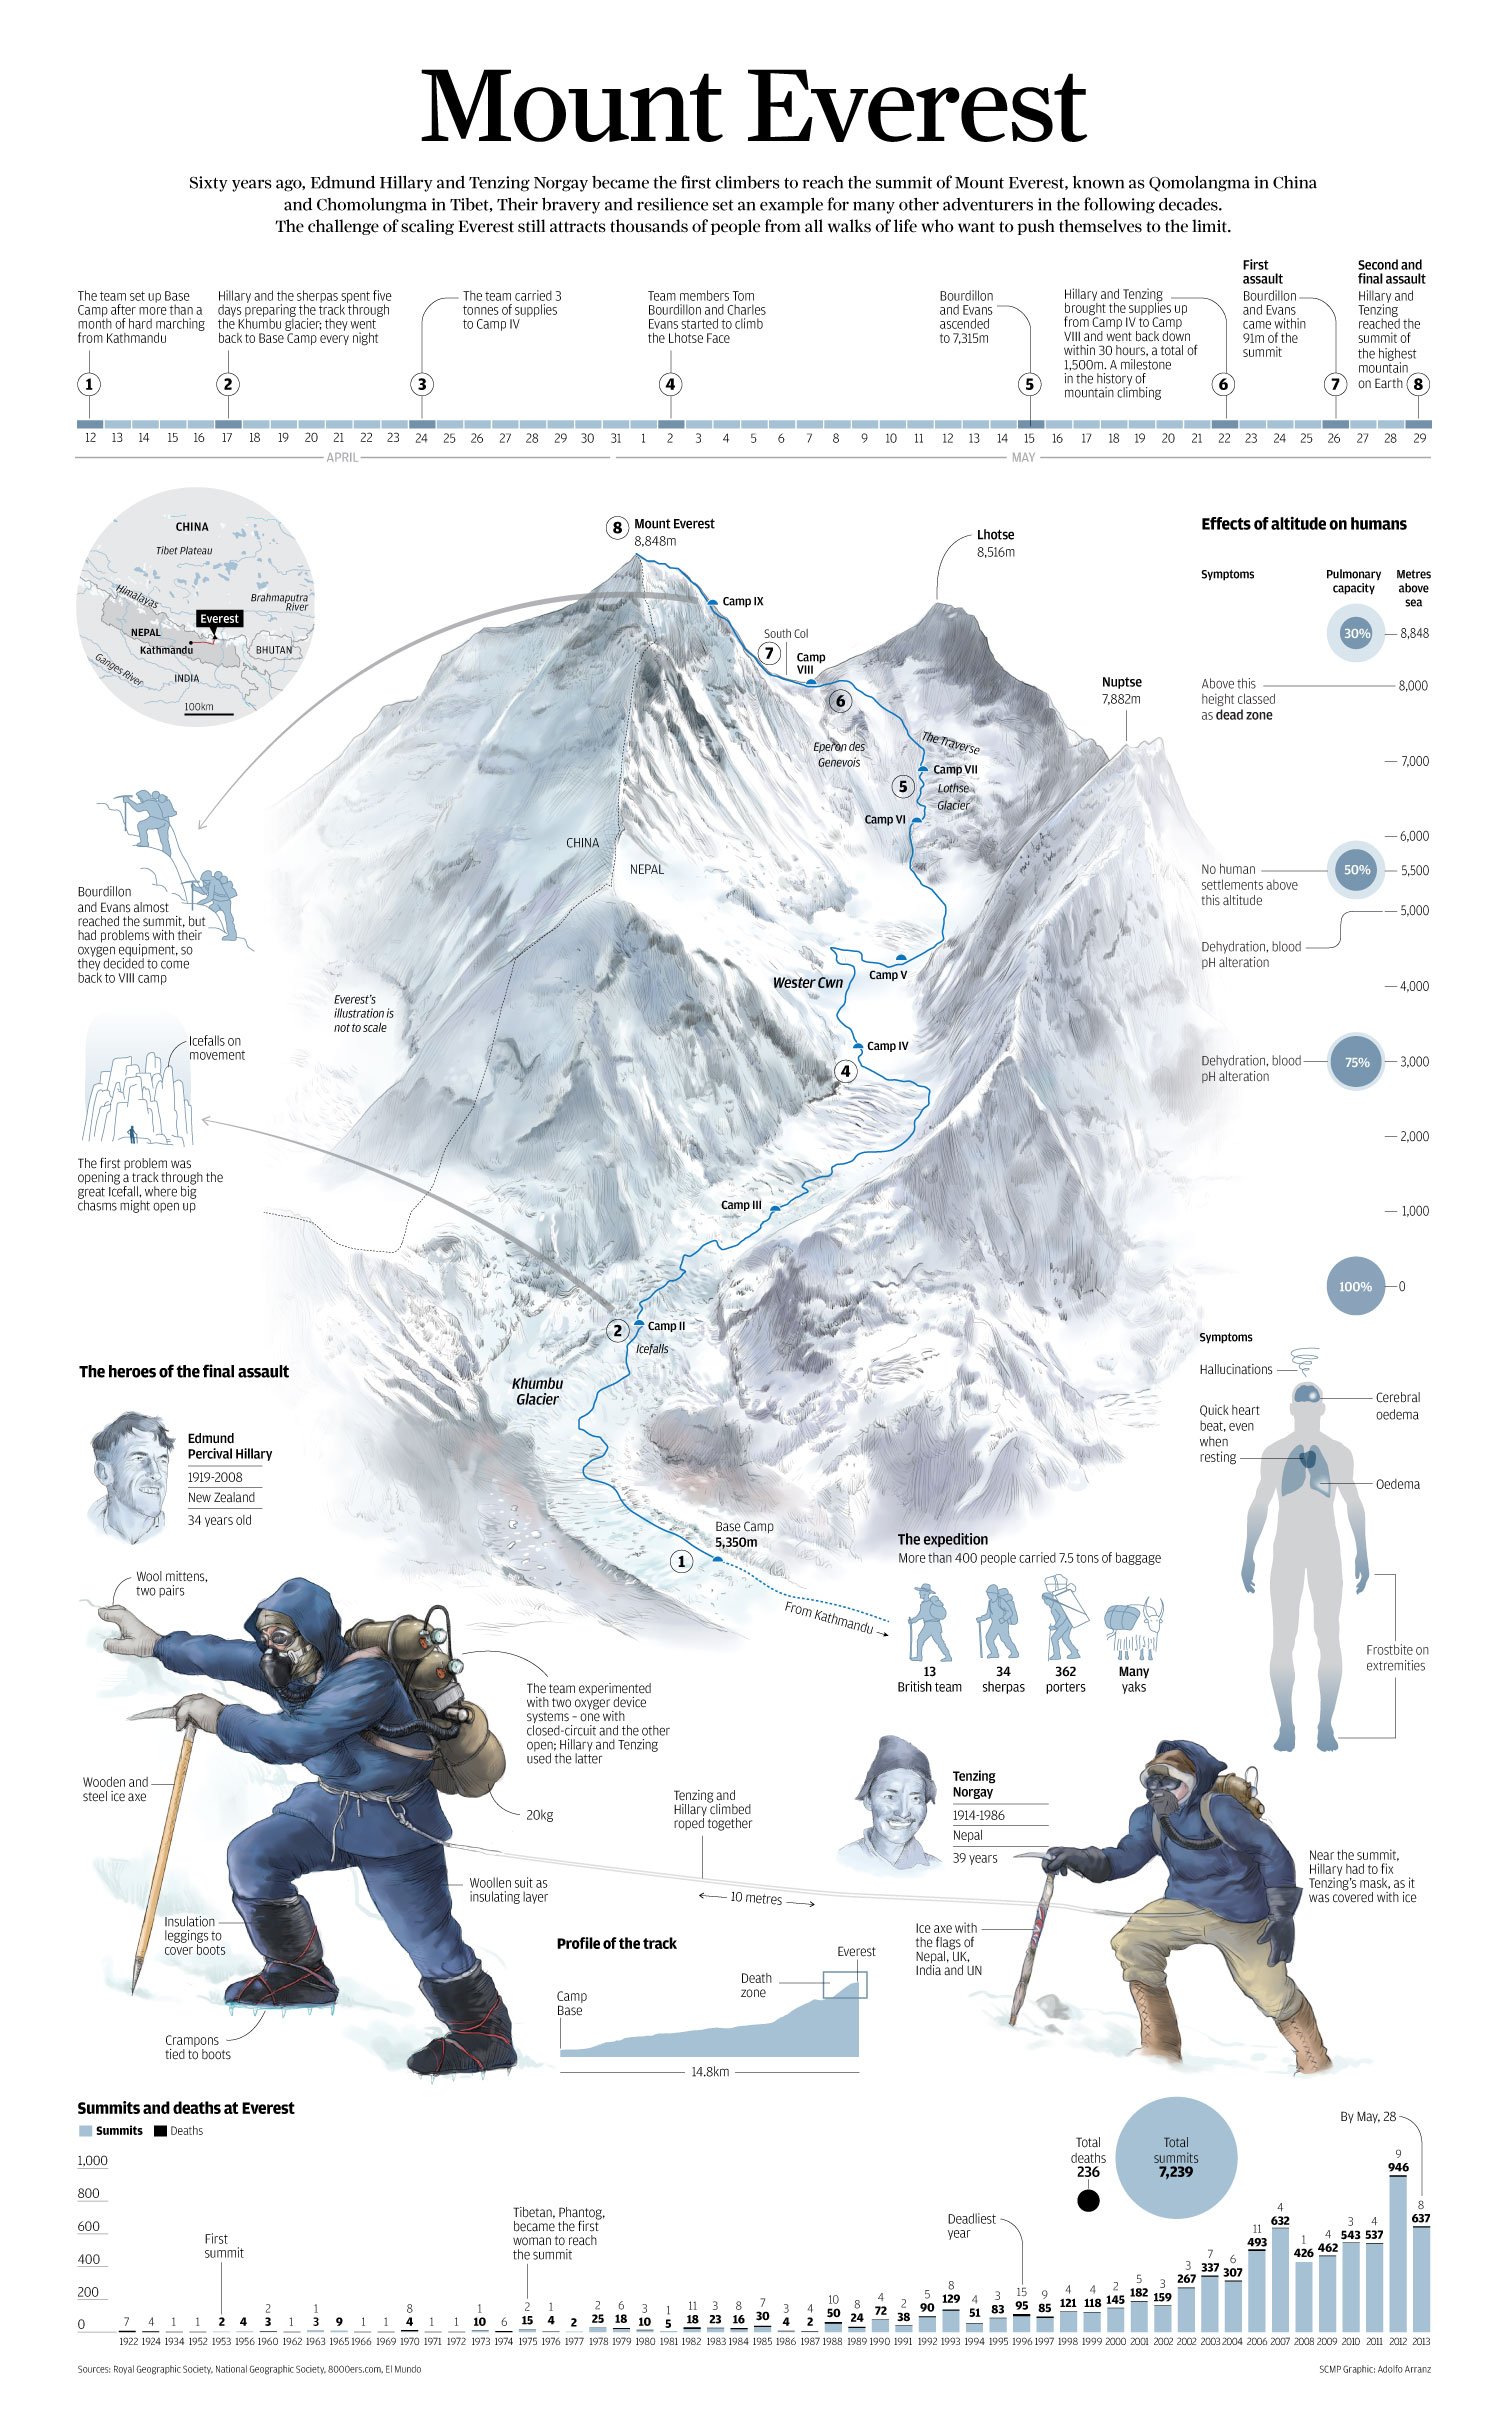 The allure of climbing Mount Everest